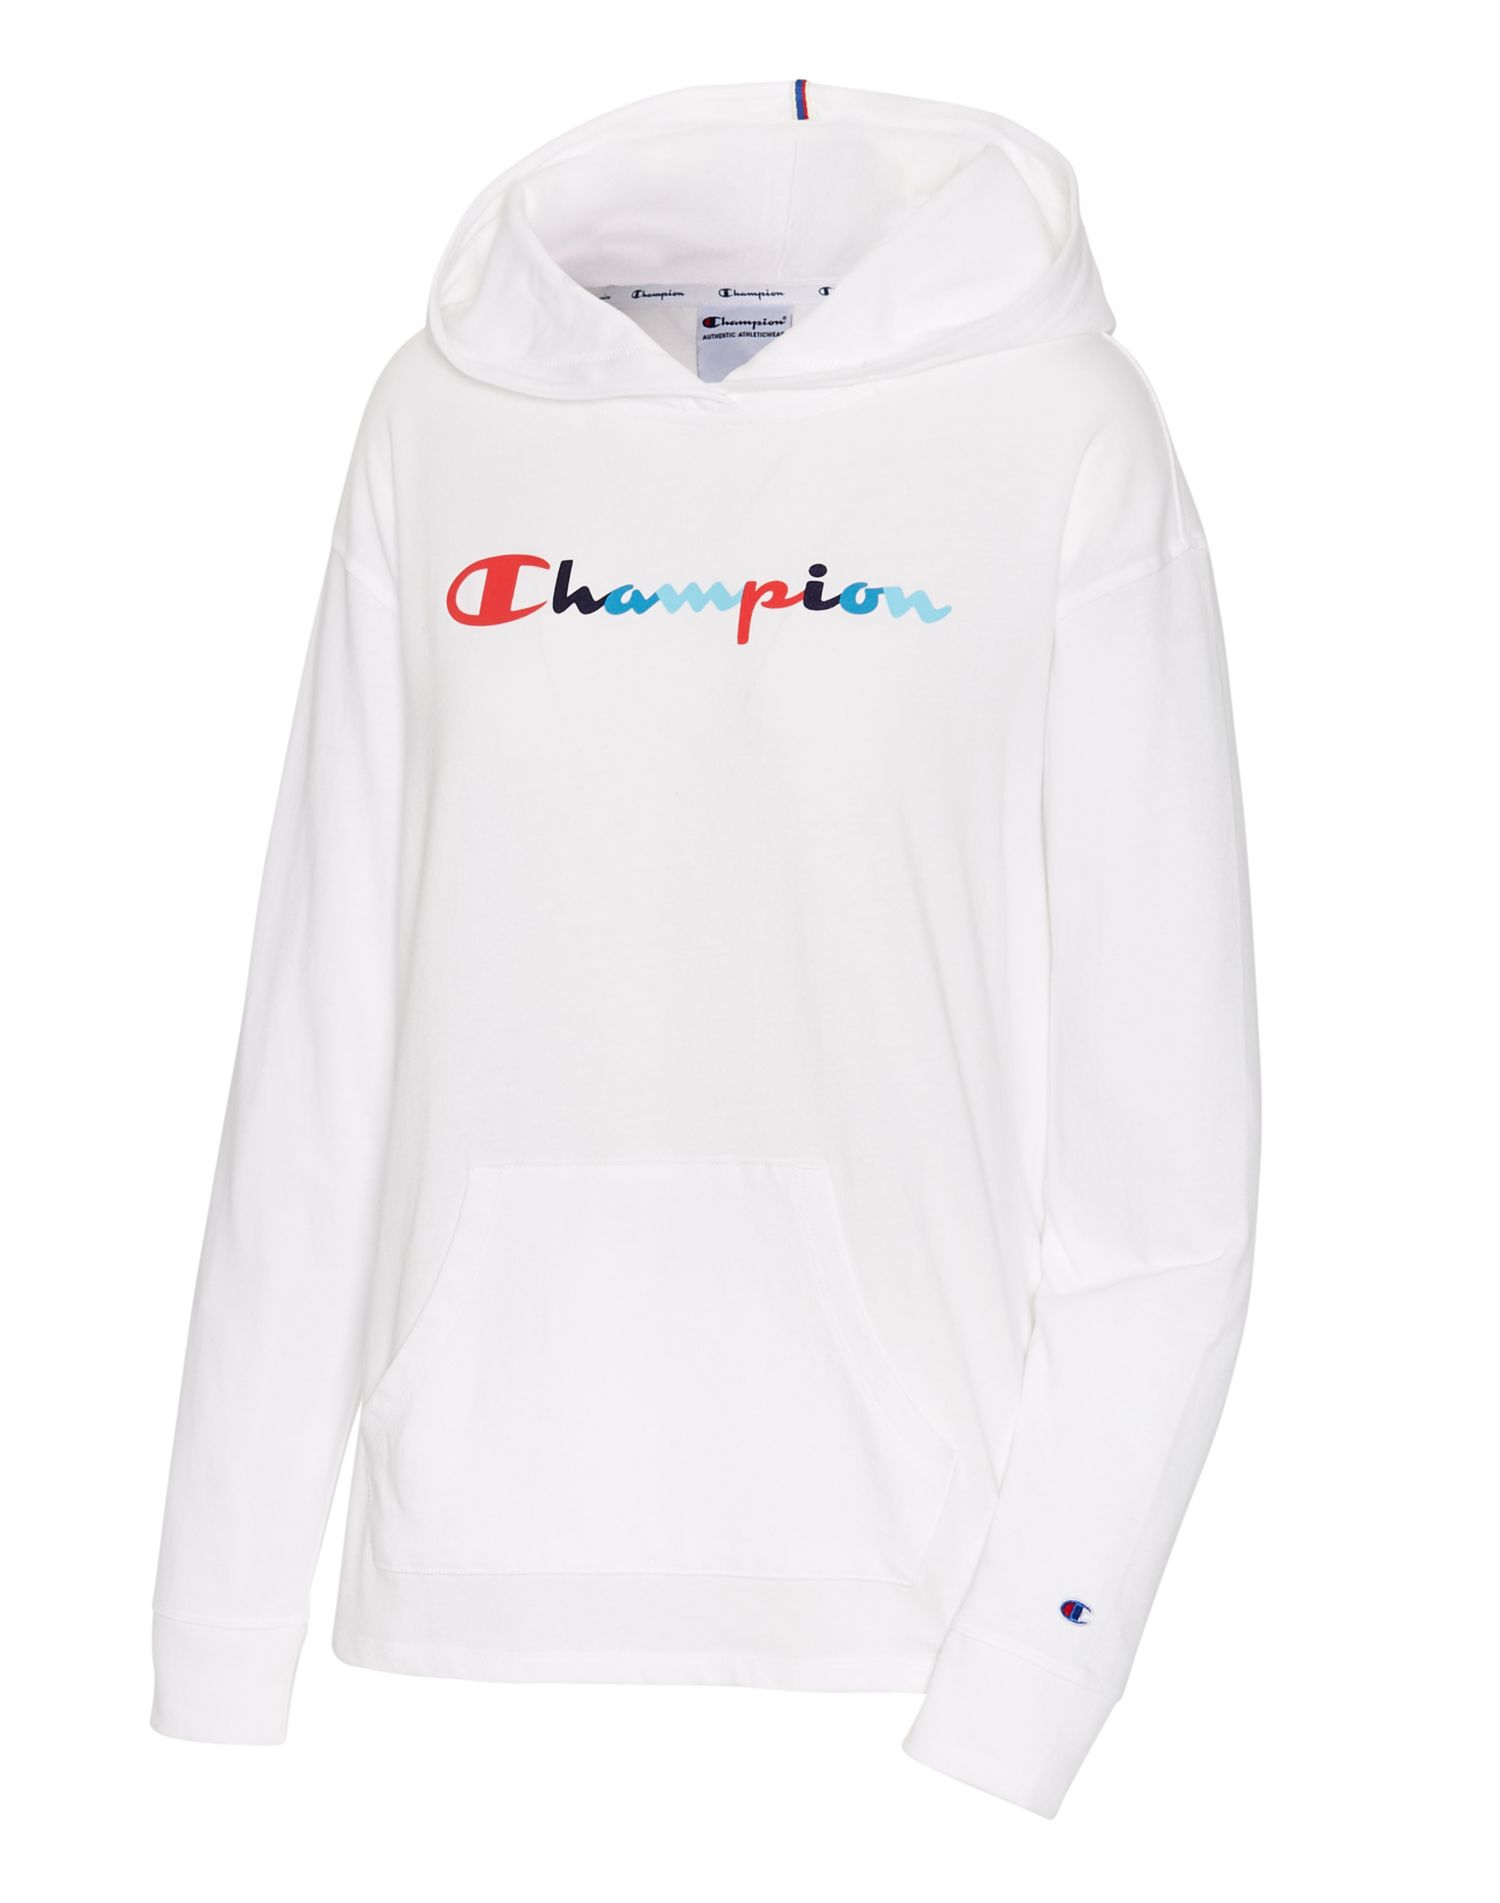 Champion Women's Middleweight Jersey Pullover Hoodie - image 1 of 5